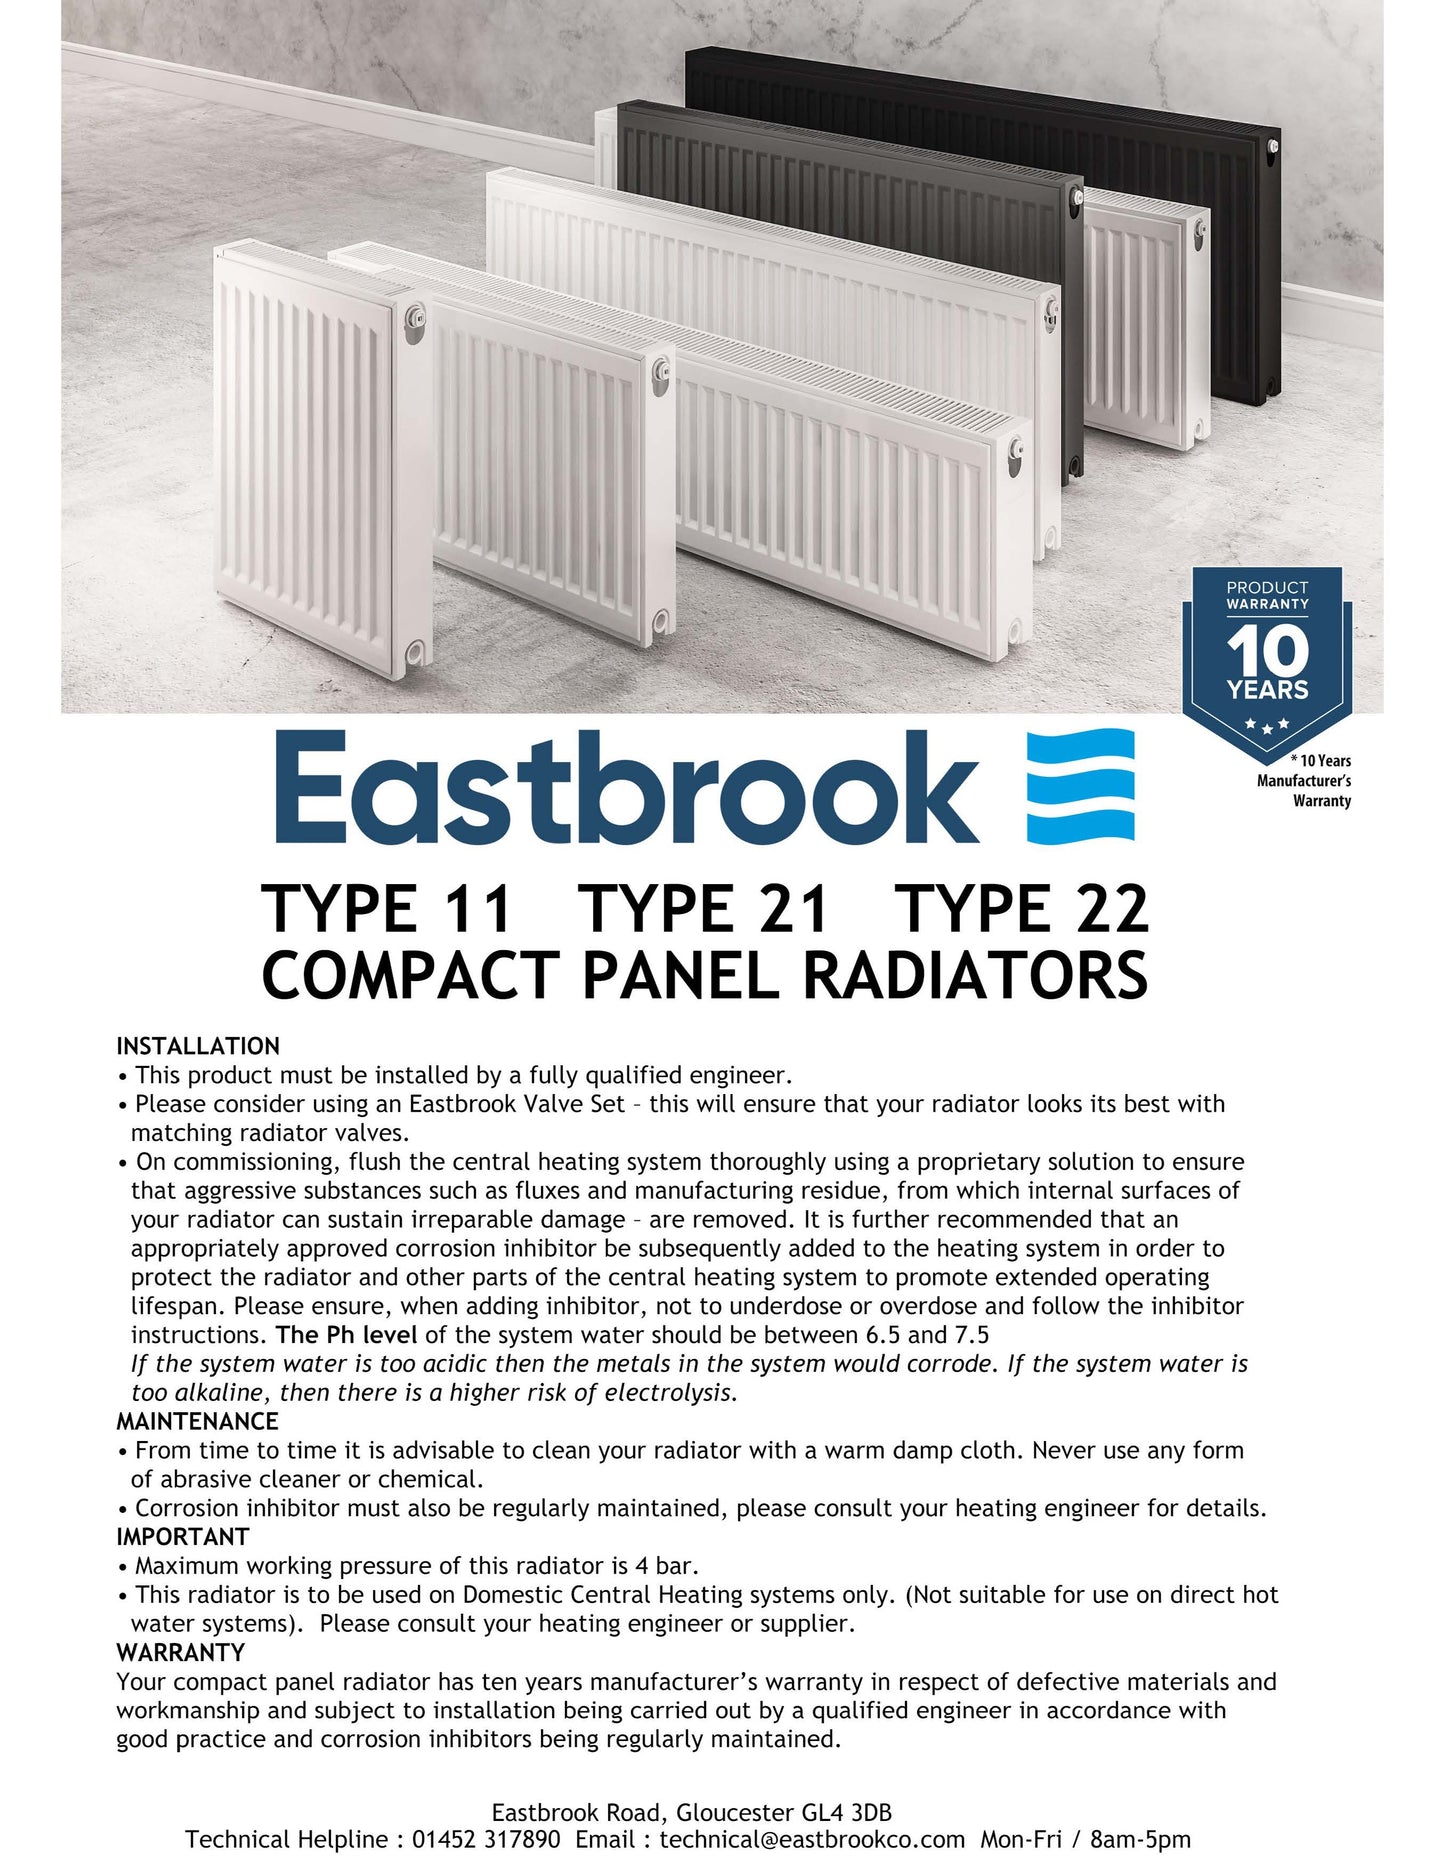 Eastbrook Type 22 Double Panel Gloss White Radiator 600mm High x 400mm Wide Technical Image 1 25.0171